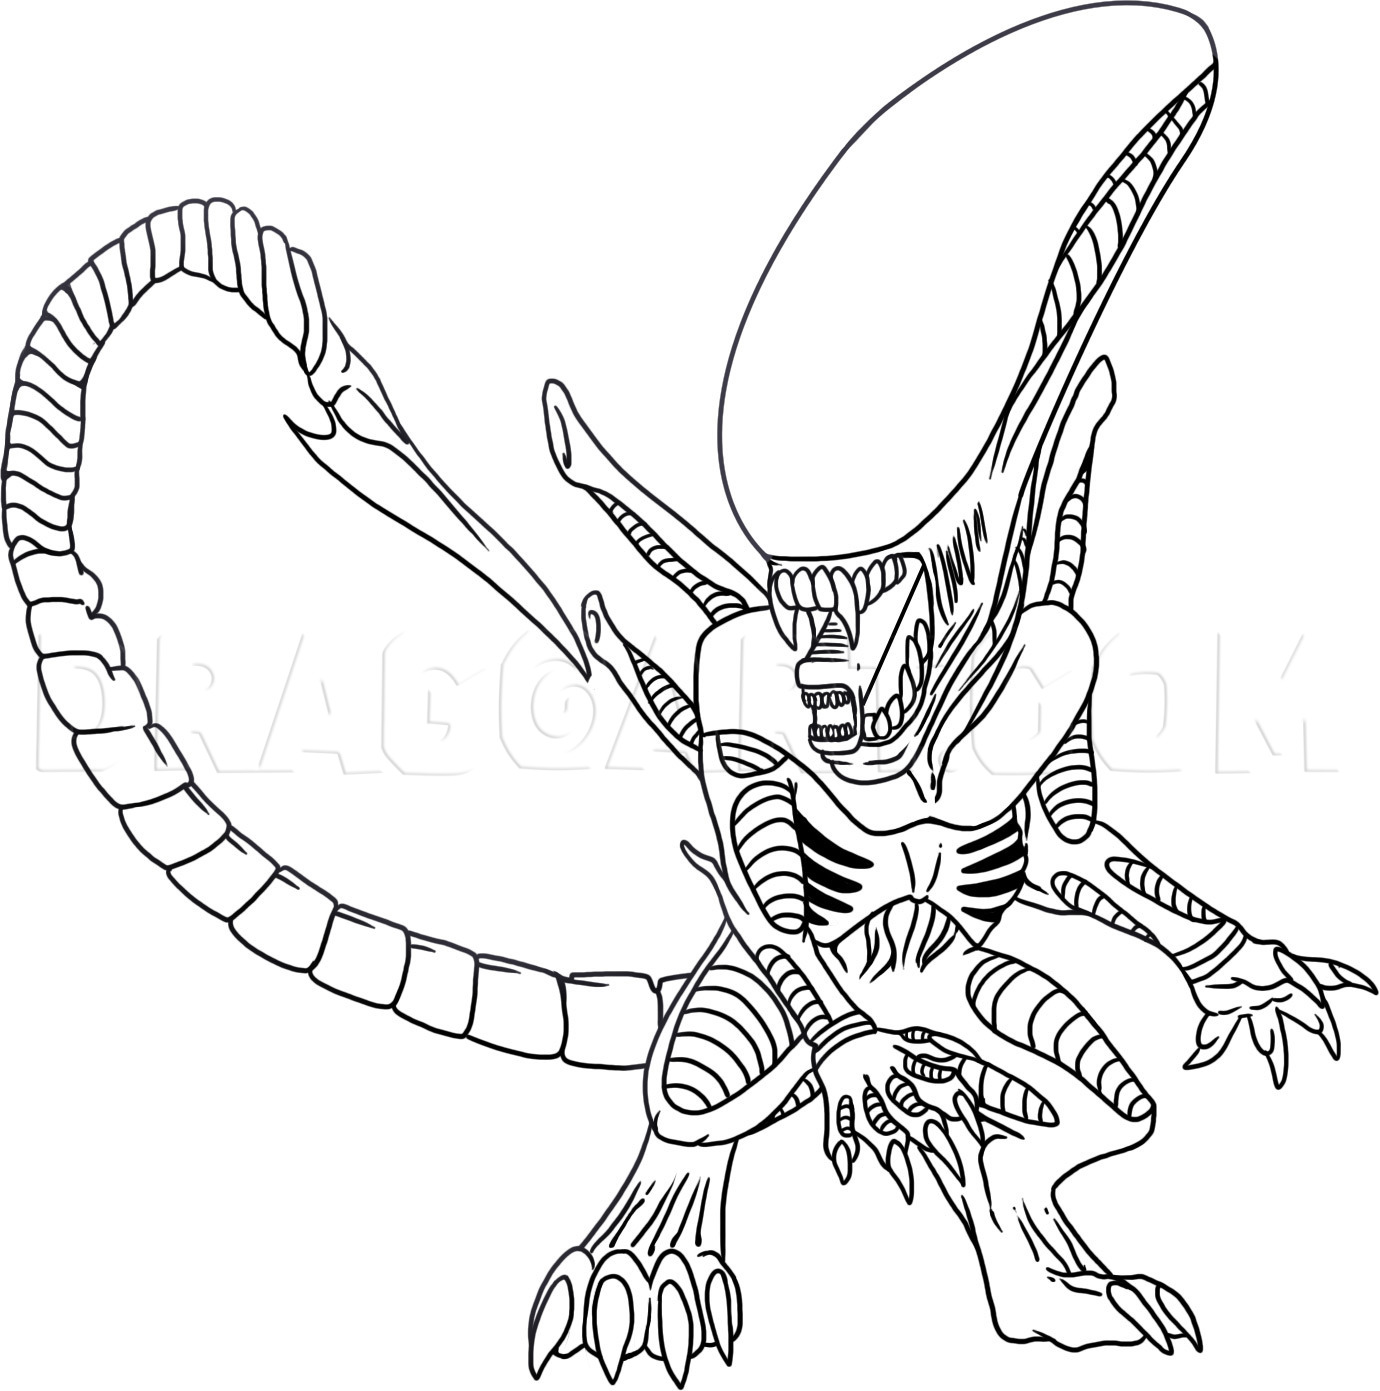 How to Draw Chibi Alien, Coloring Page, Trace Drawing